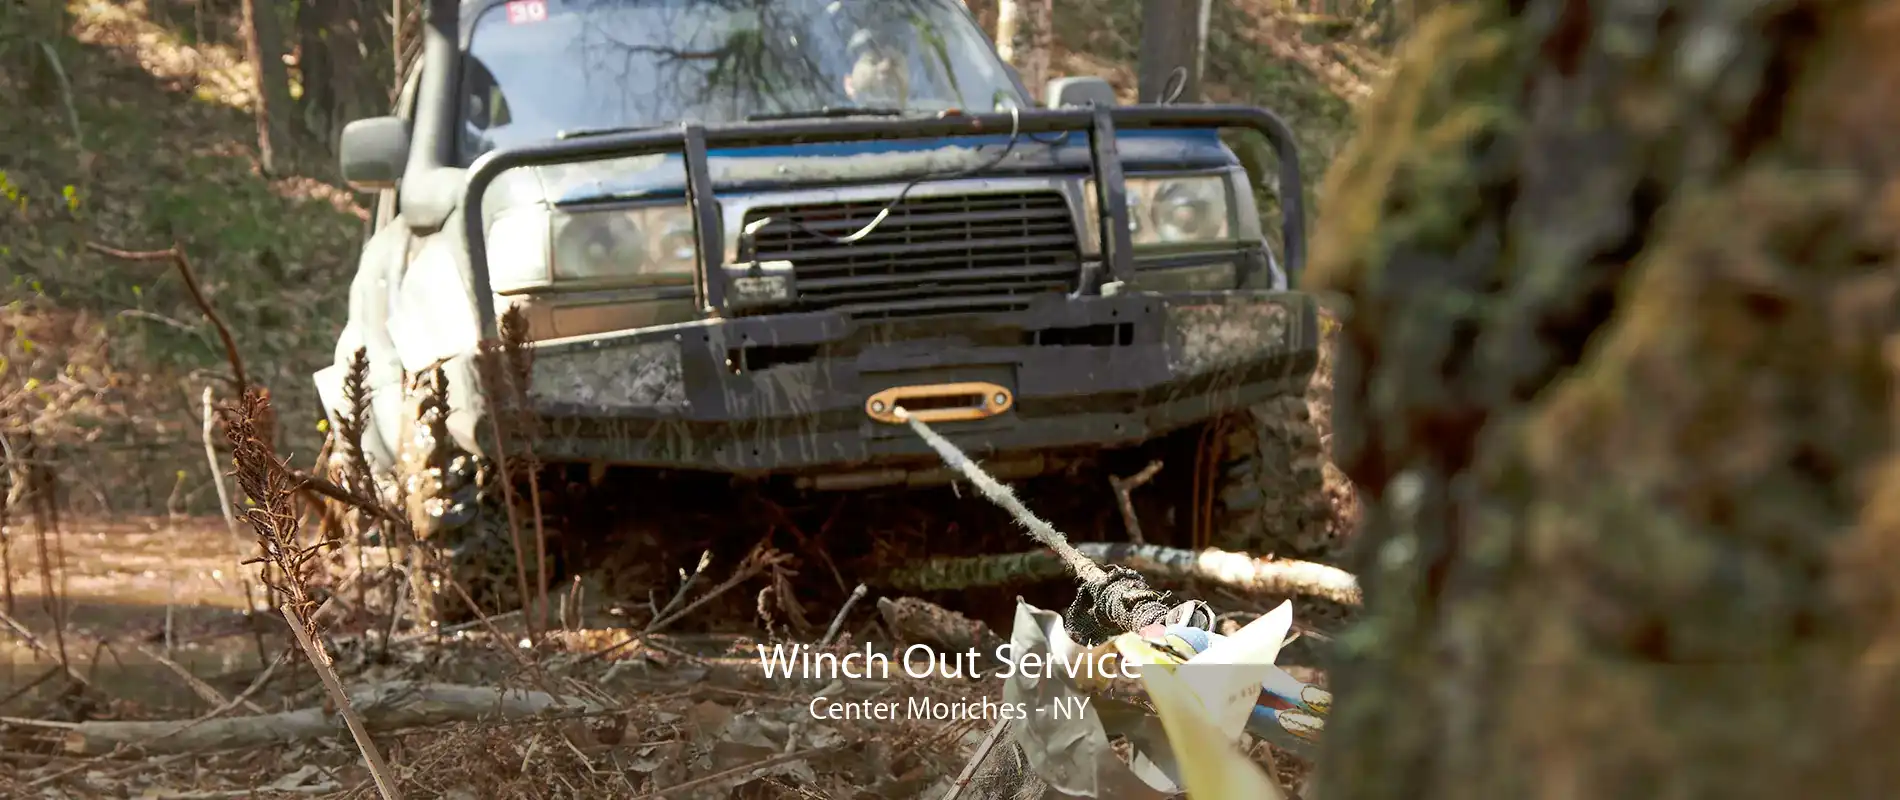 Winch Out Service Center Moriches - NY